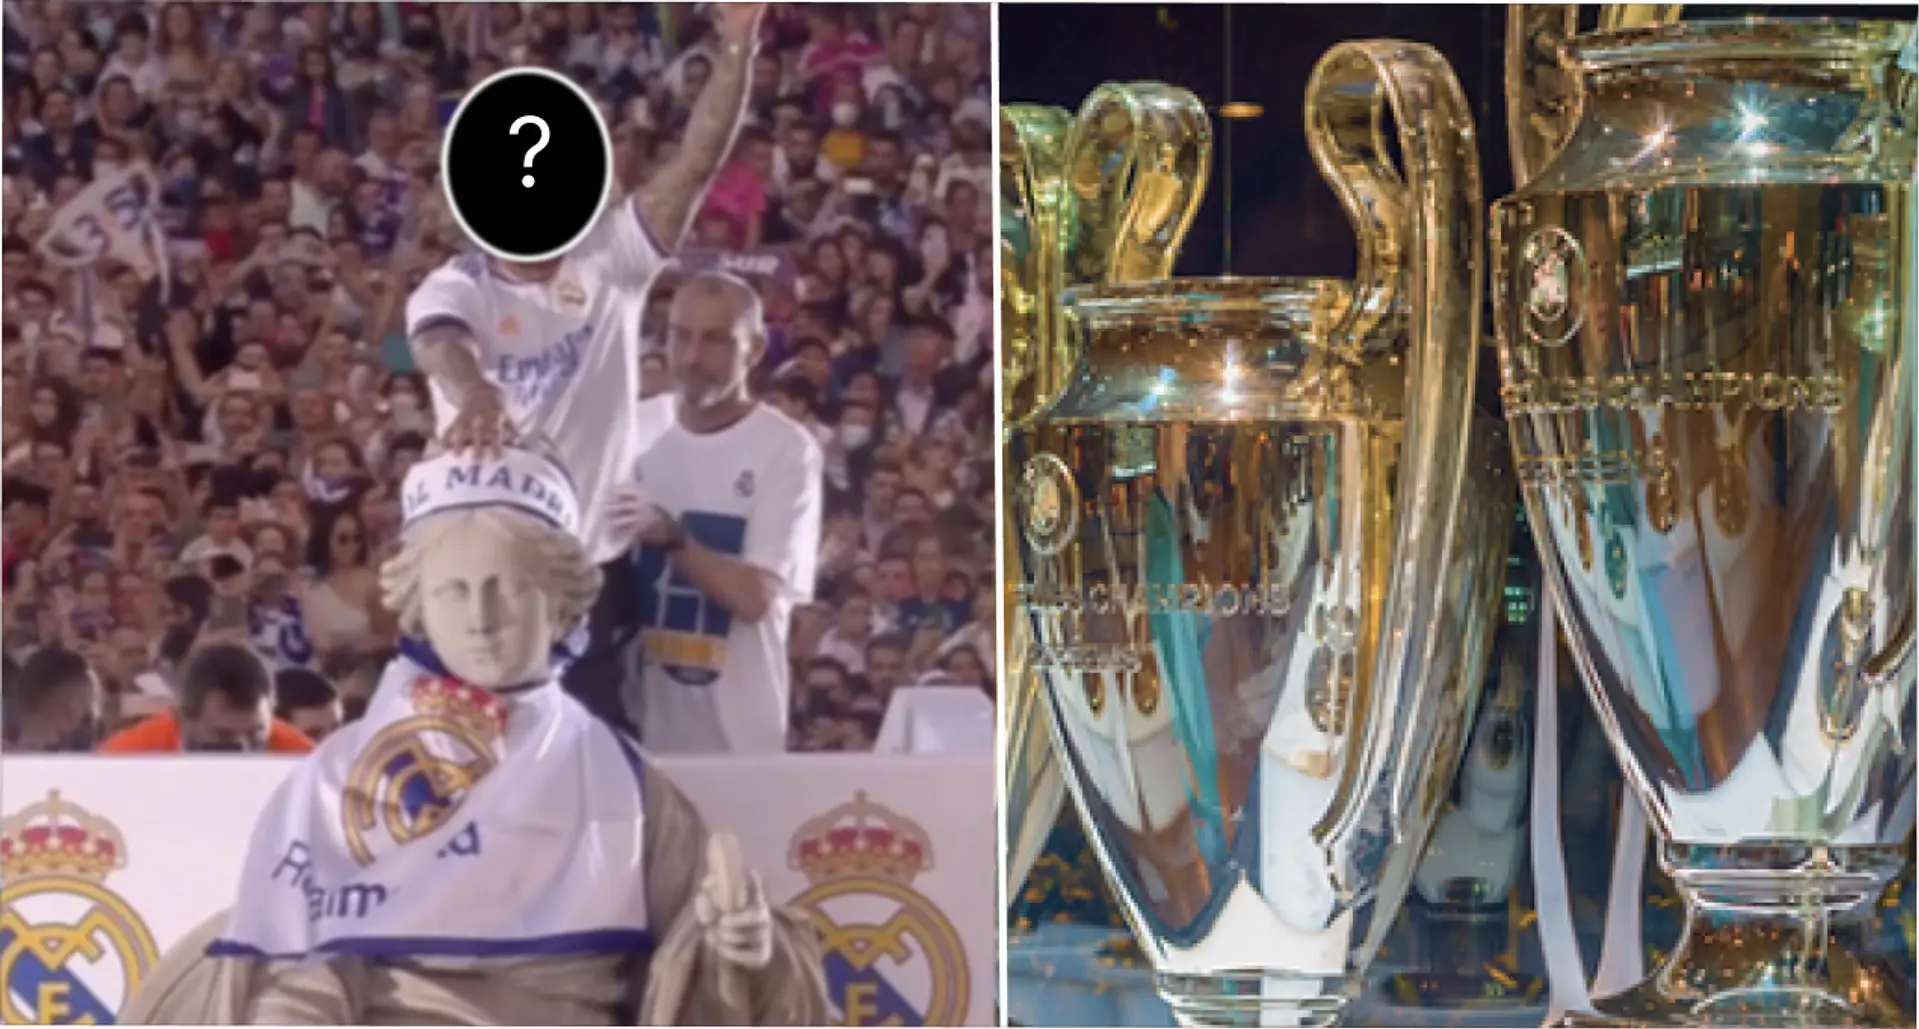 Who is Real Madrid's most decorated player?